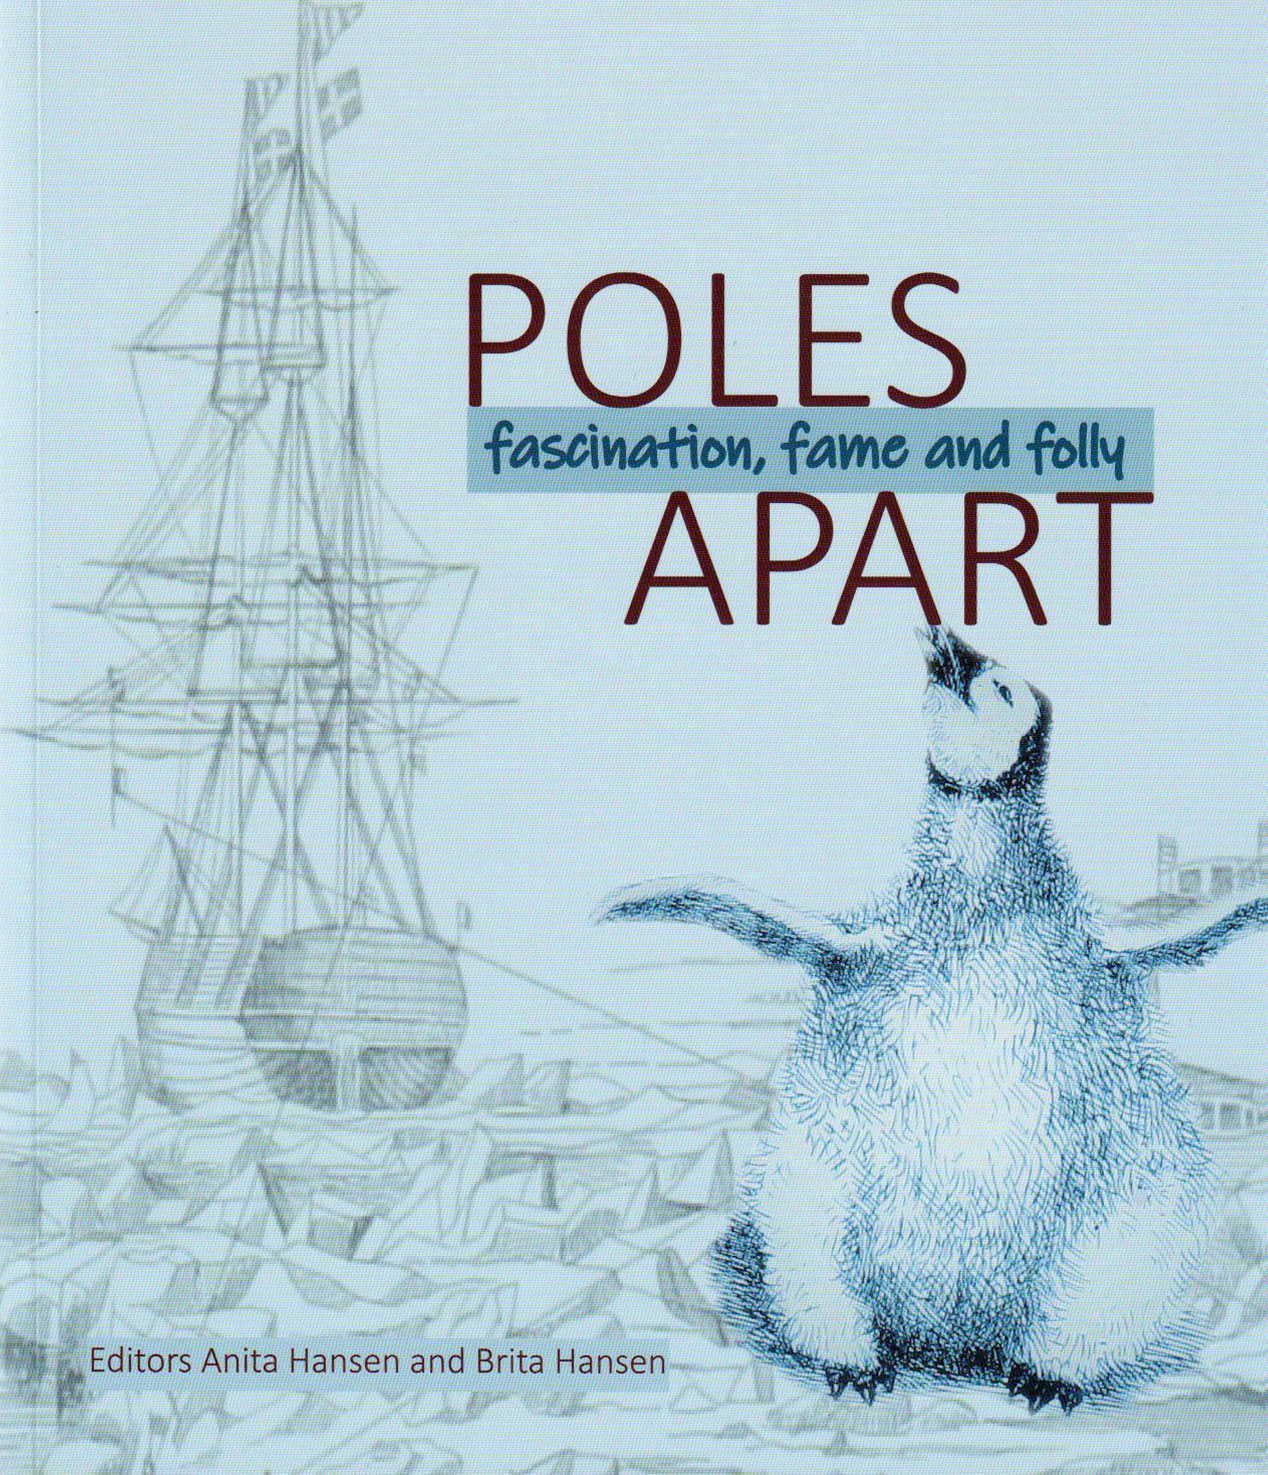 Poles Apart - Fascination, fame and folly - softcover